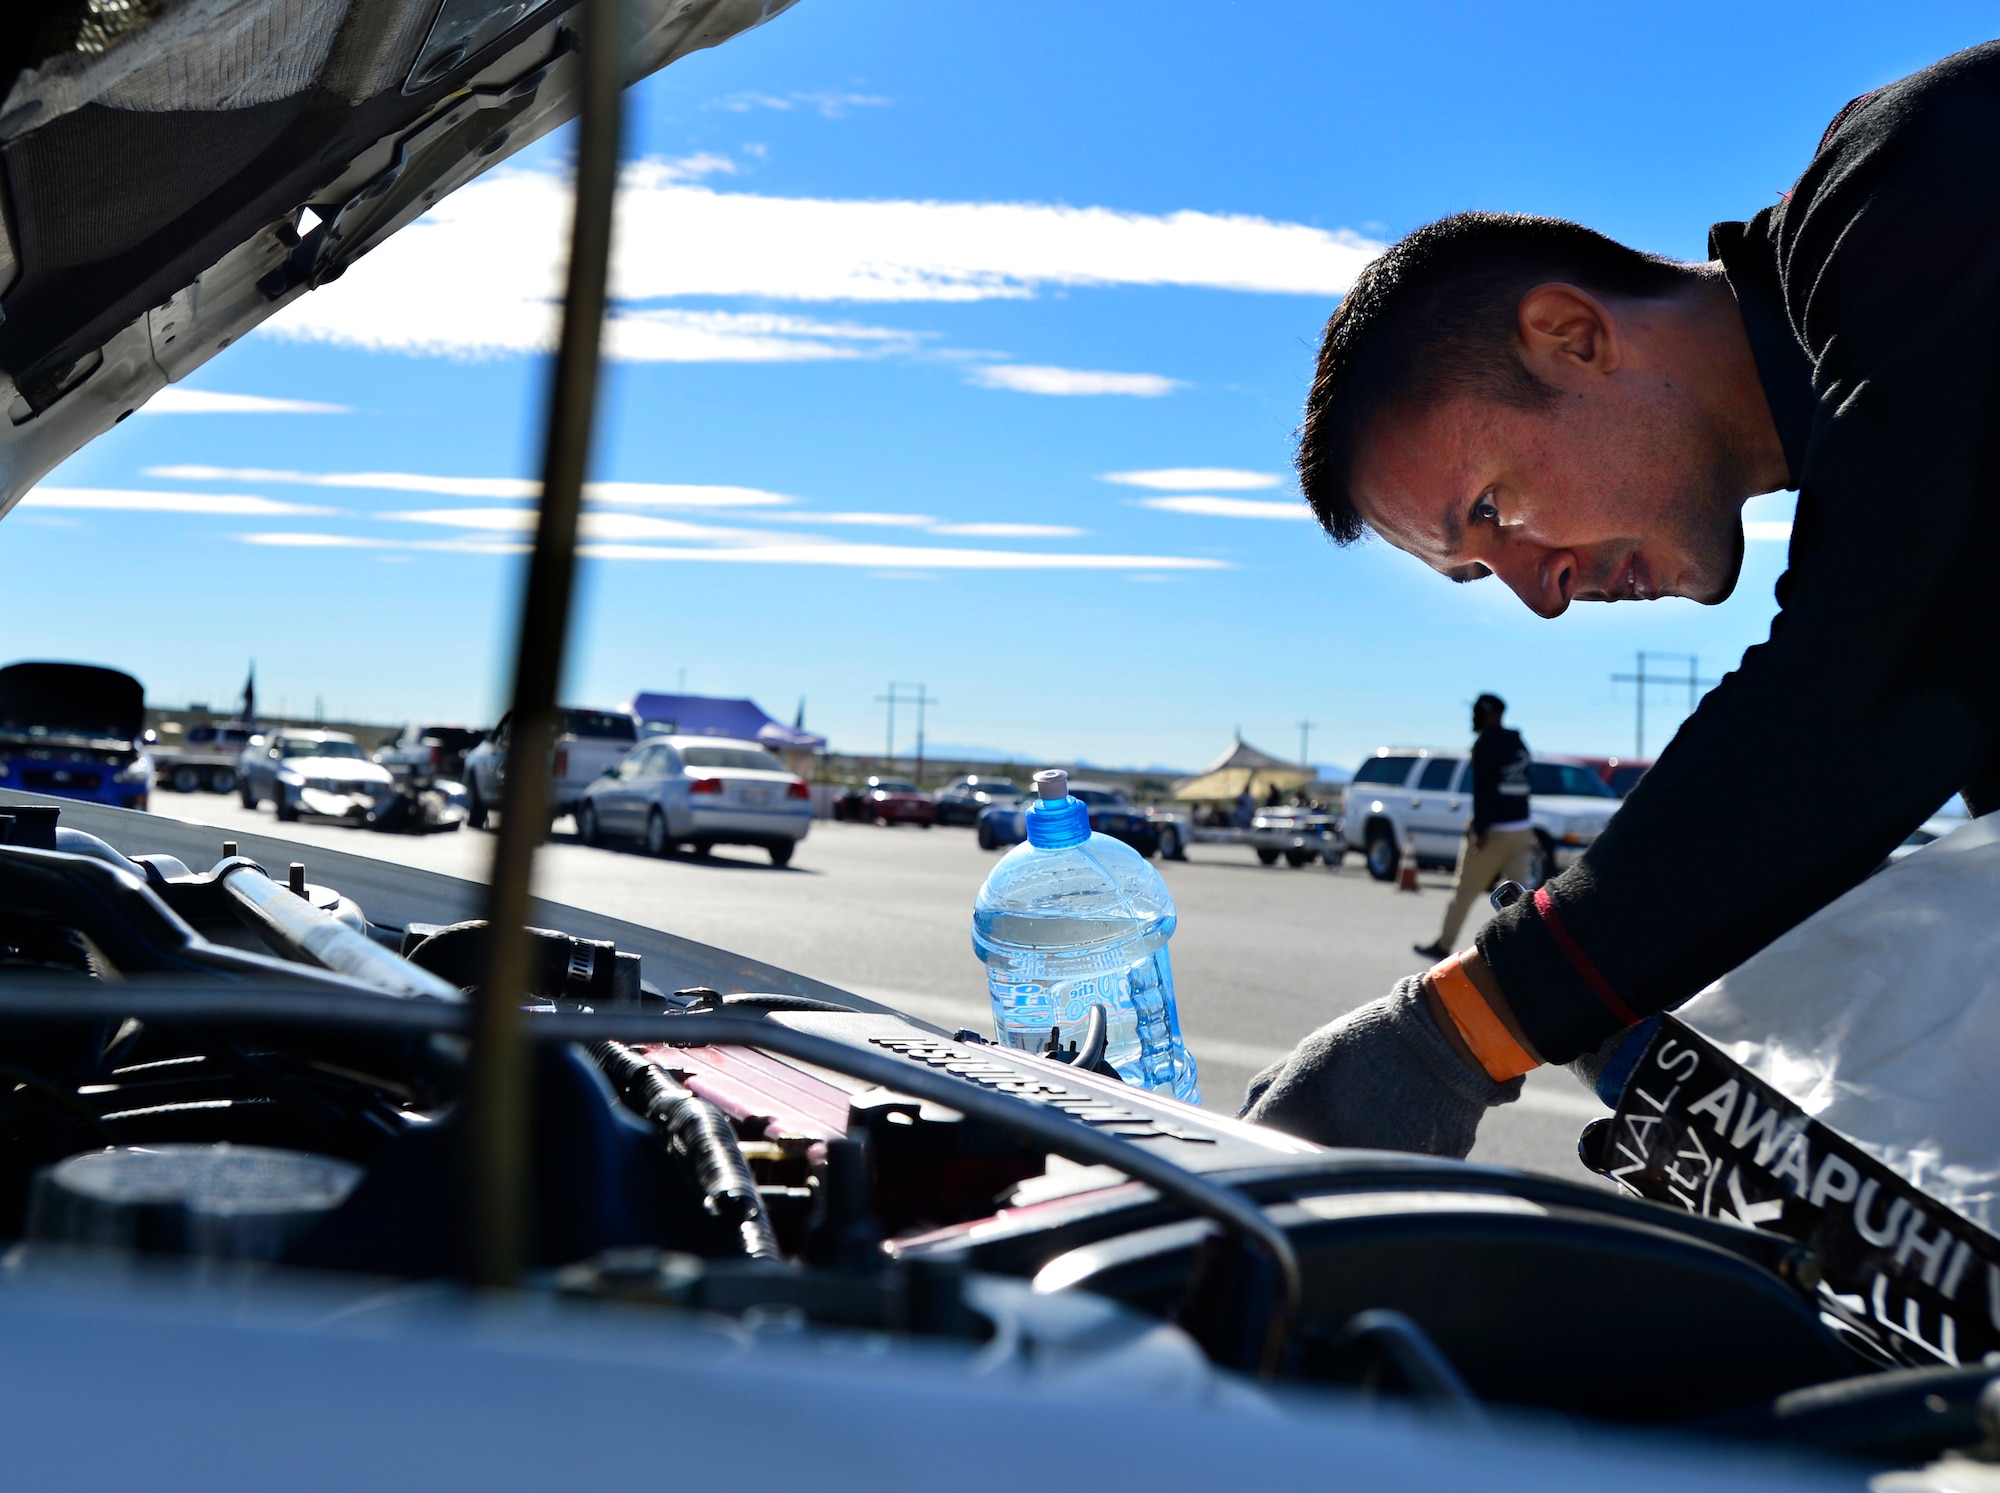 Tech. Sgt. Gabriel, 432nd Wing/432nd Air Expeditionary Wing MQ-9 Reaper sensor operator, inspects his Mitsubishi Lancer Evolution at the Spring Mountain Raceway Nov. 1, 2015, in Pahrump, Nevada. Gabriel has owned and modified his Evolution for over five years. (U.S. Air Force photo by Airman 1st Class Christian Clausen/released)